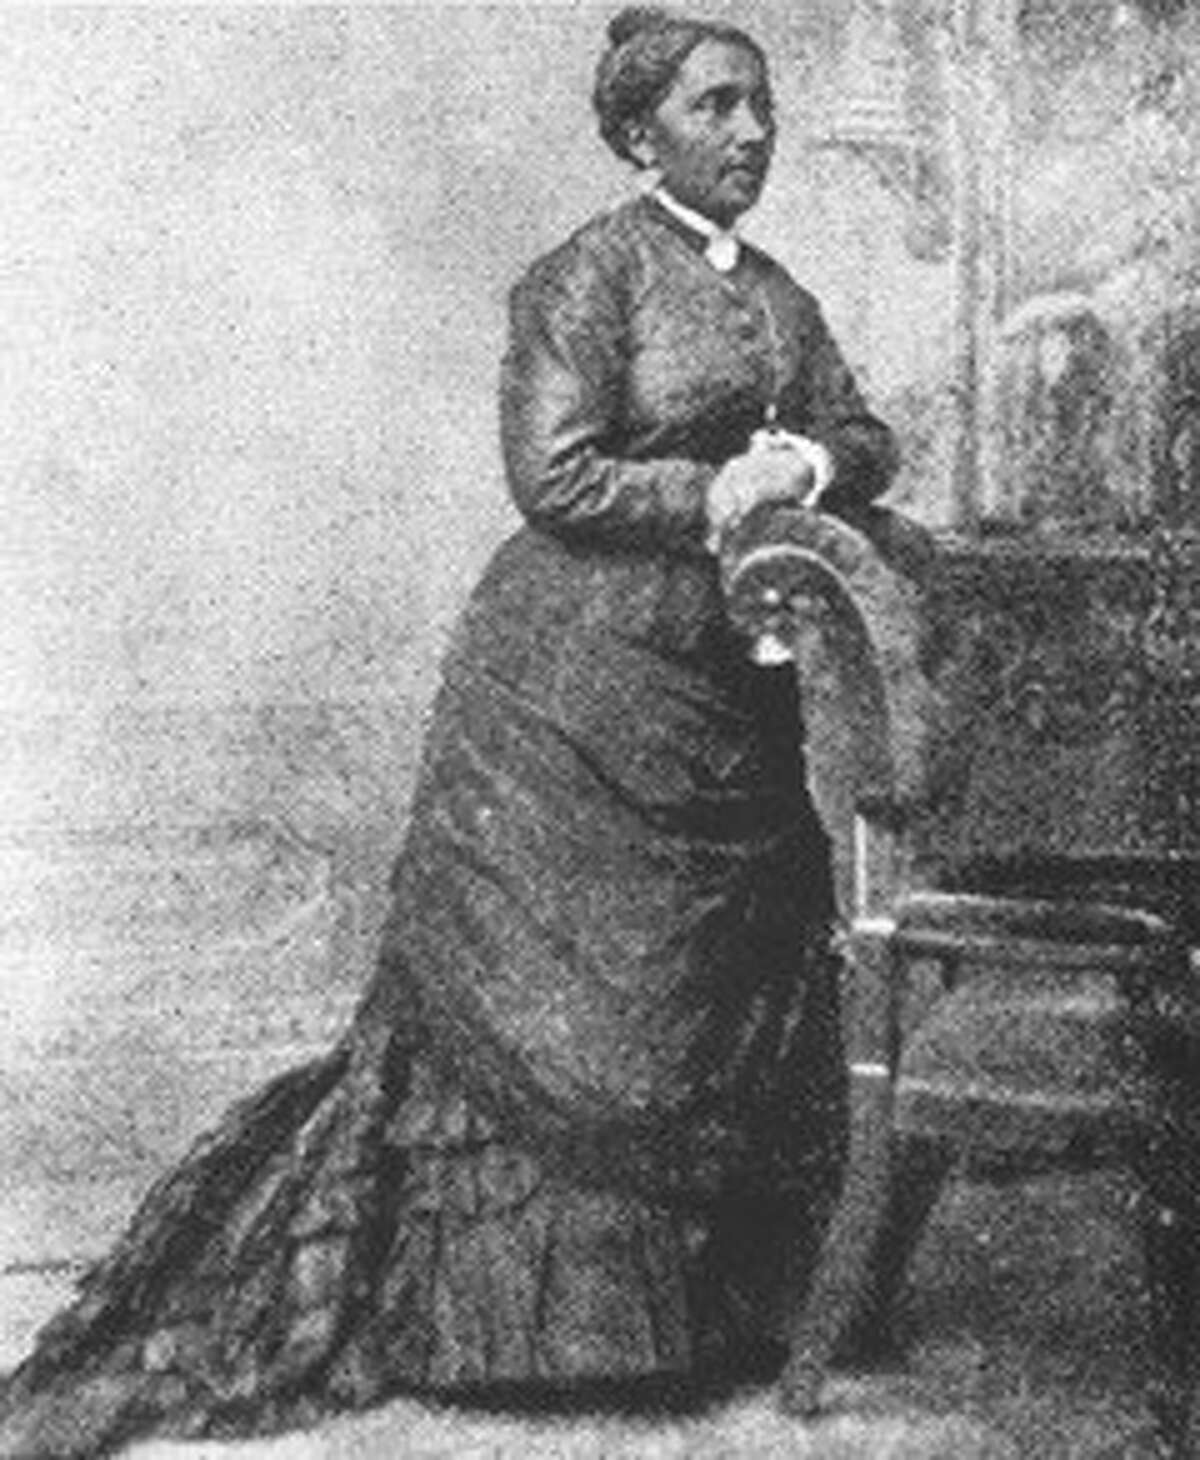 Elizabeth Jennings fought for her right to ride a streetcar in the mid-19th century in New York City.